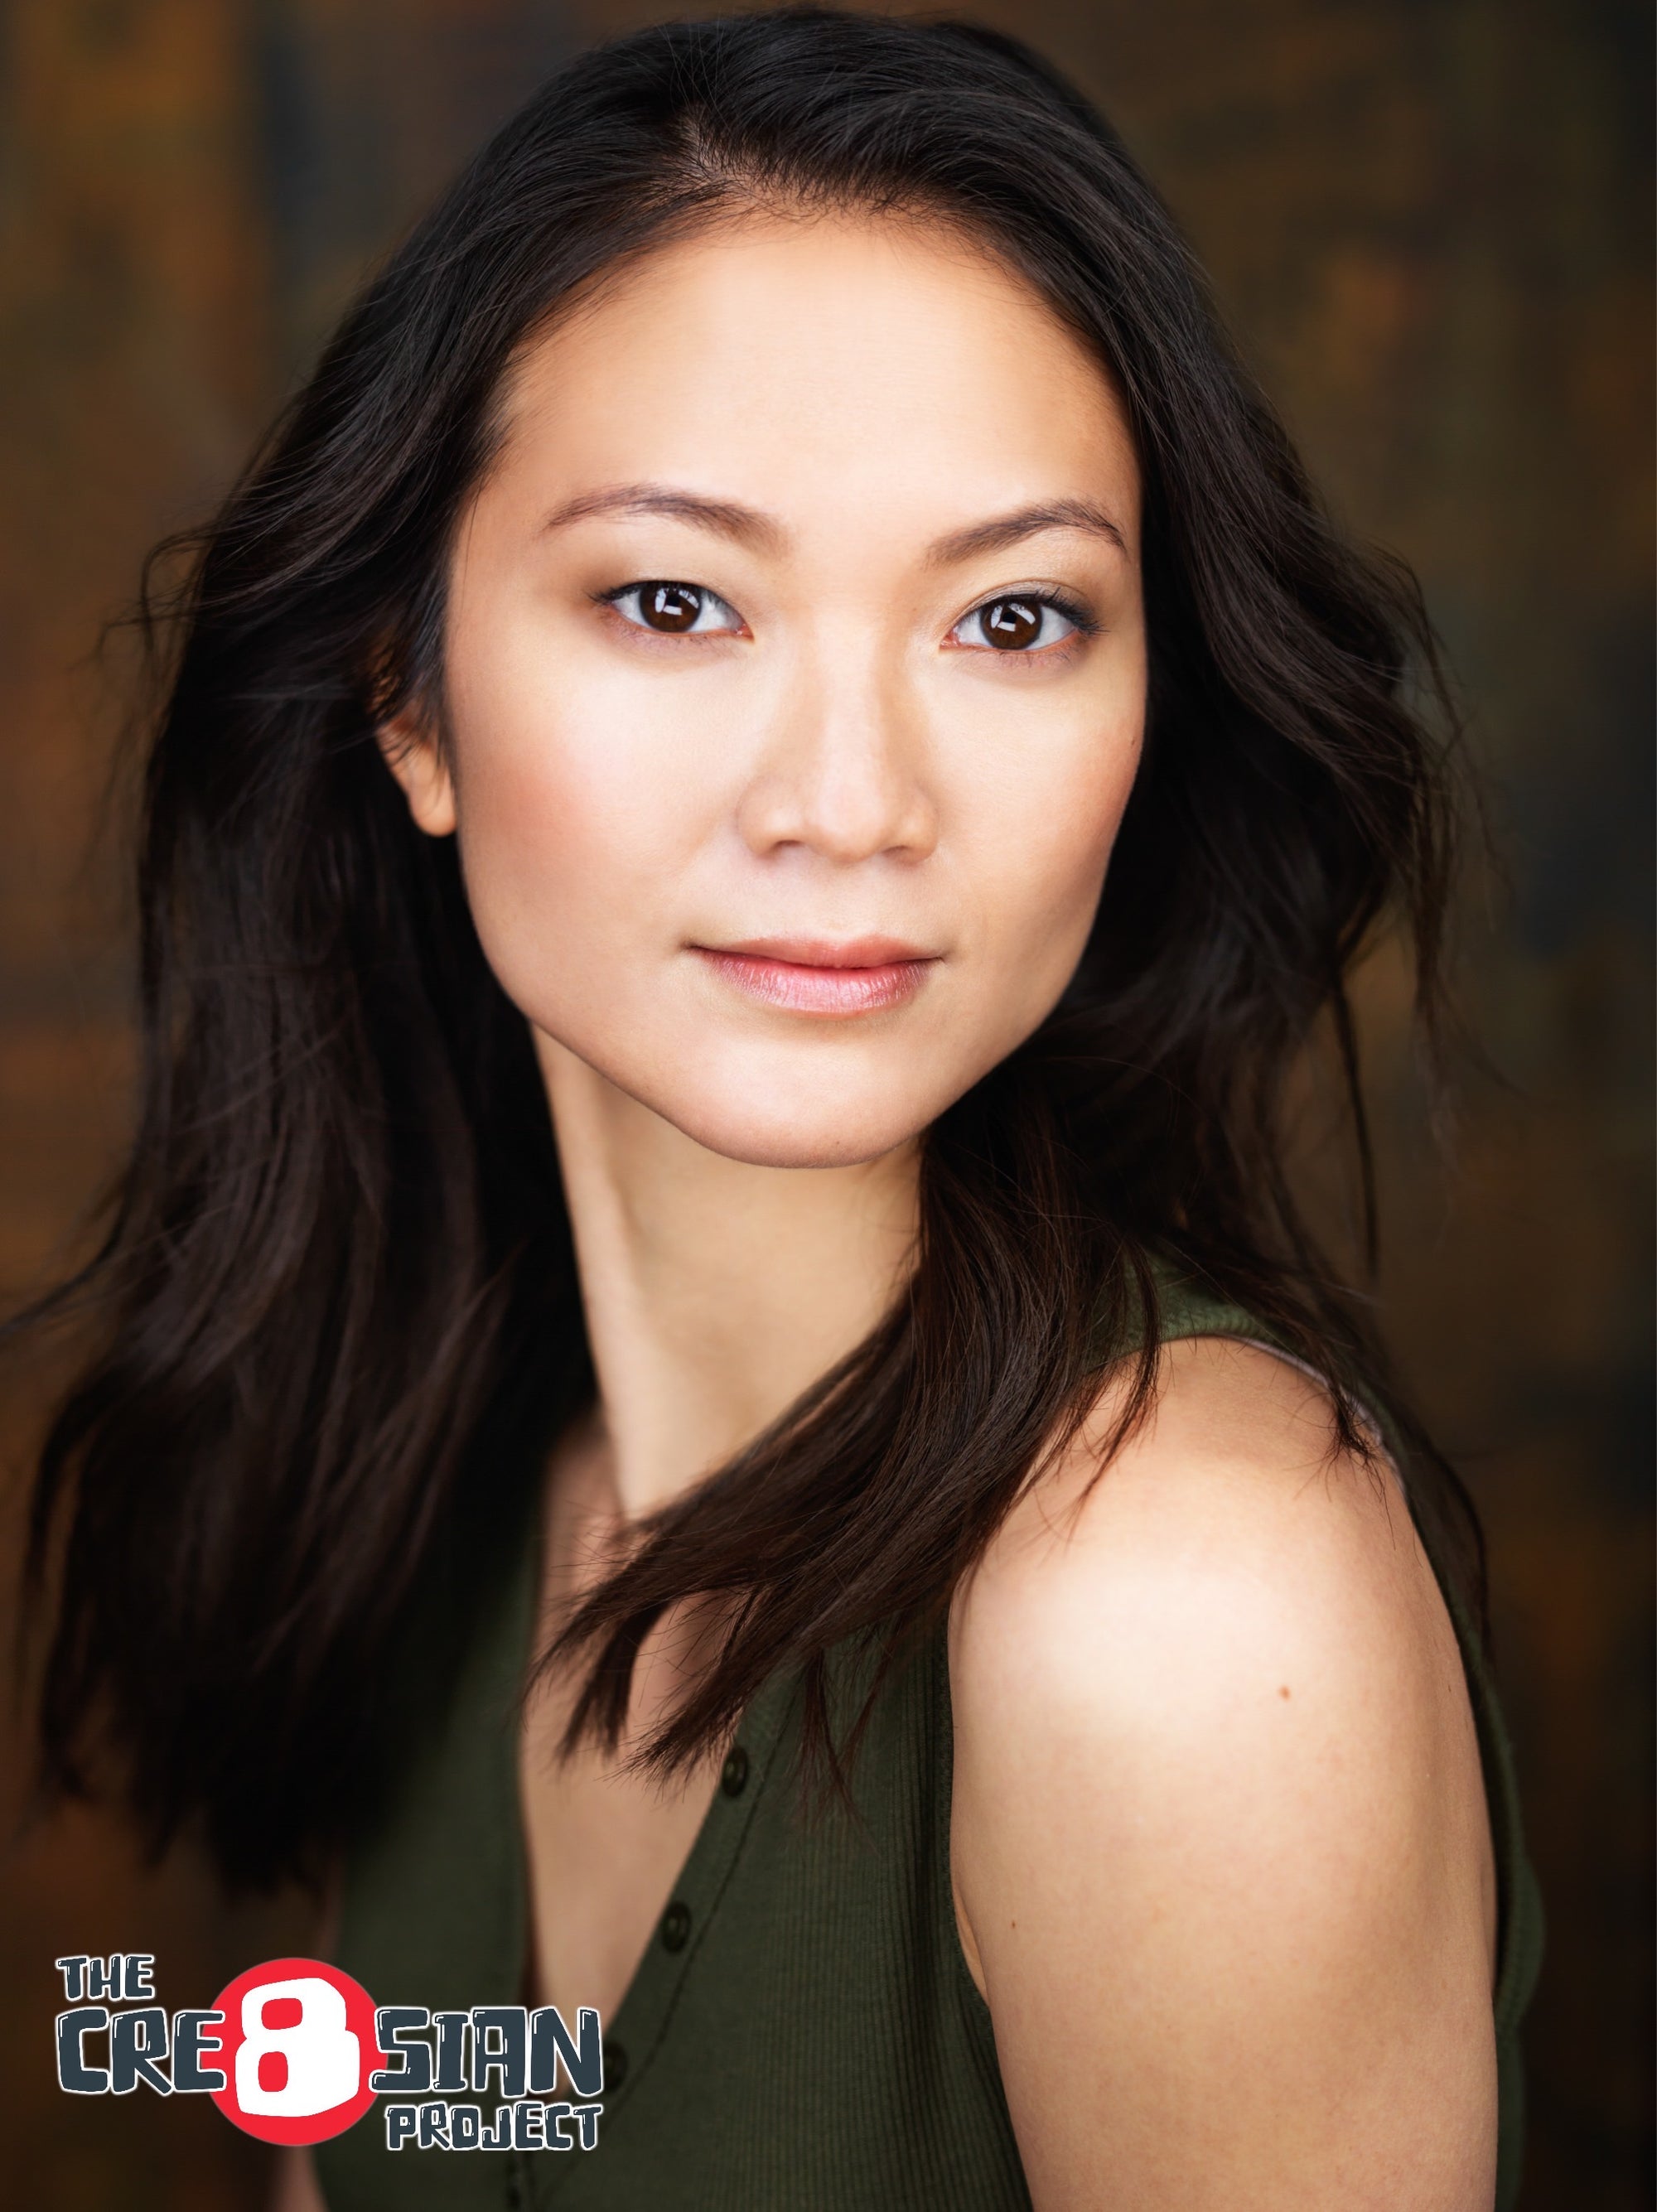 Amazing Asians in the Arts: Erica Wong